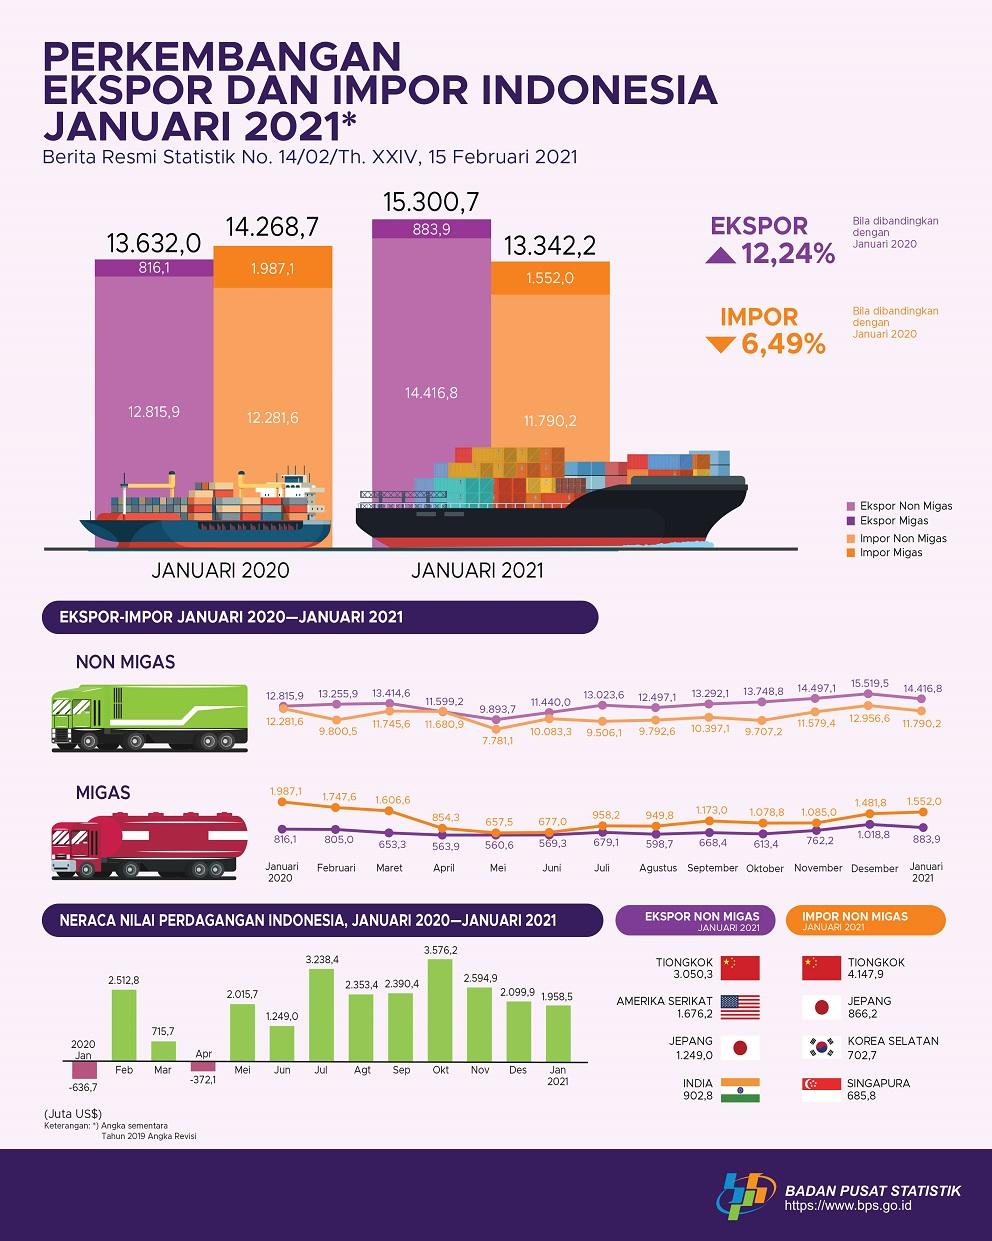 January 2021 exports reached US$15.30 billion, imports reached to US$13.34 billion